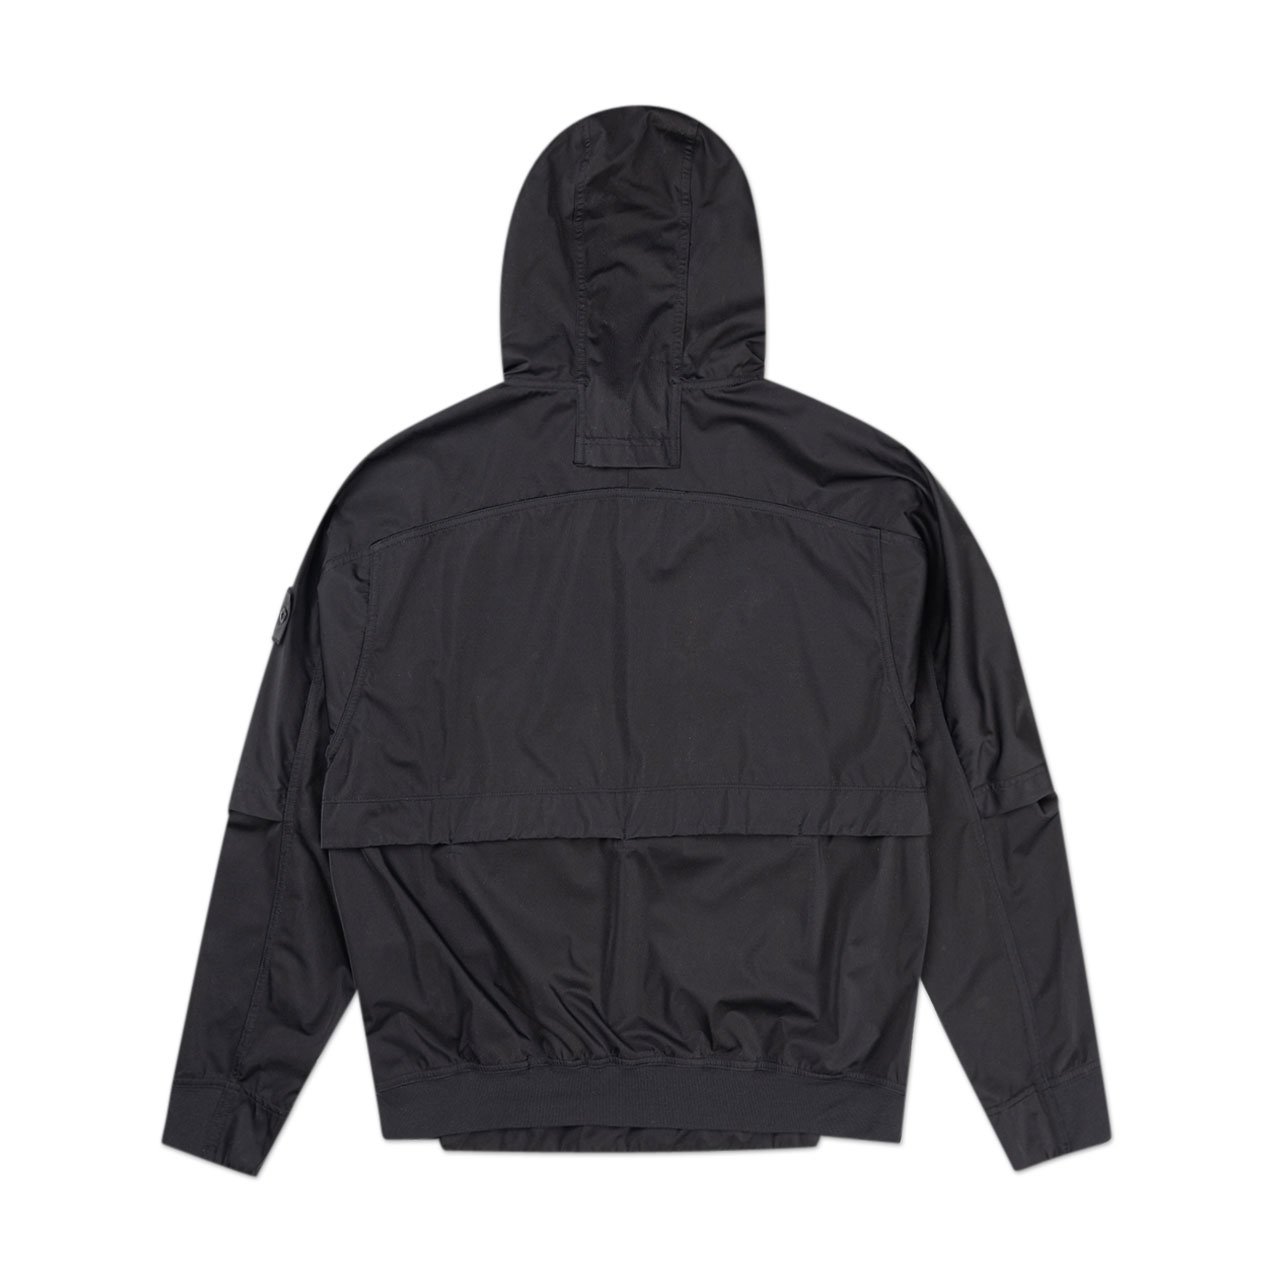 stone island shadow project packable anorak (black) - 721940504.v0029 - a.plus - Image - 2